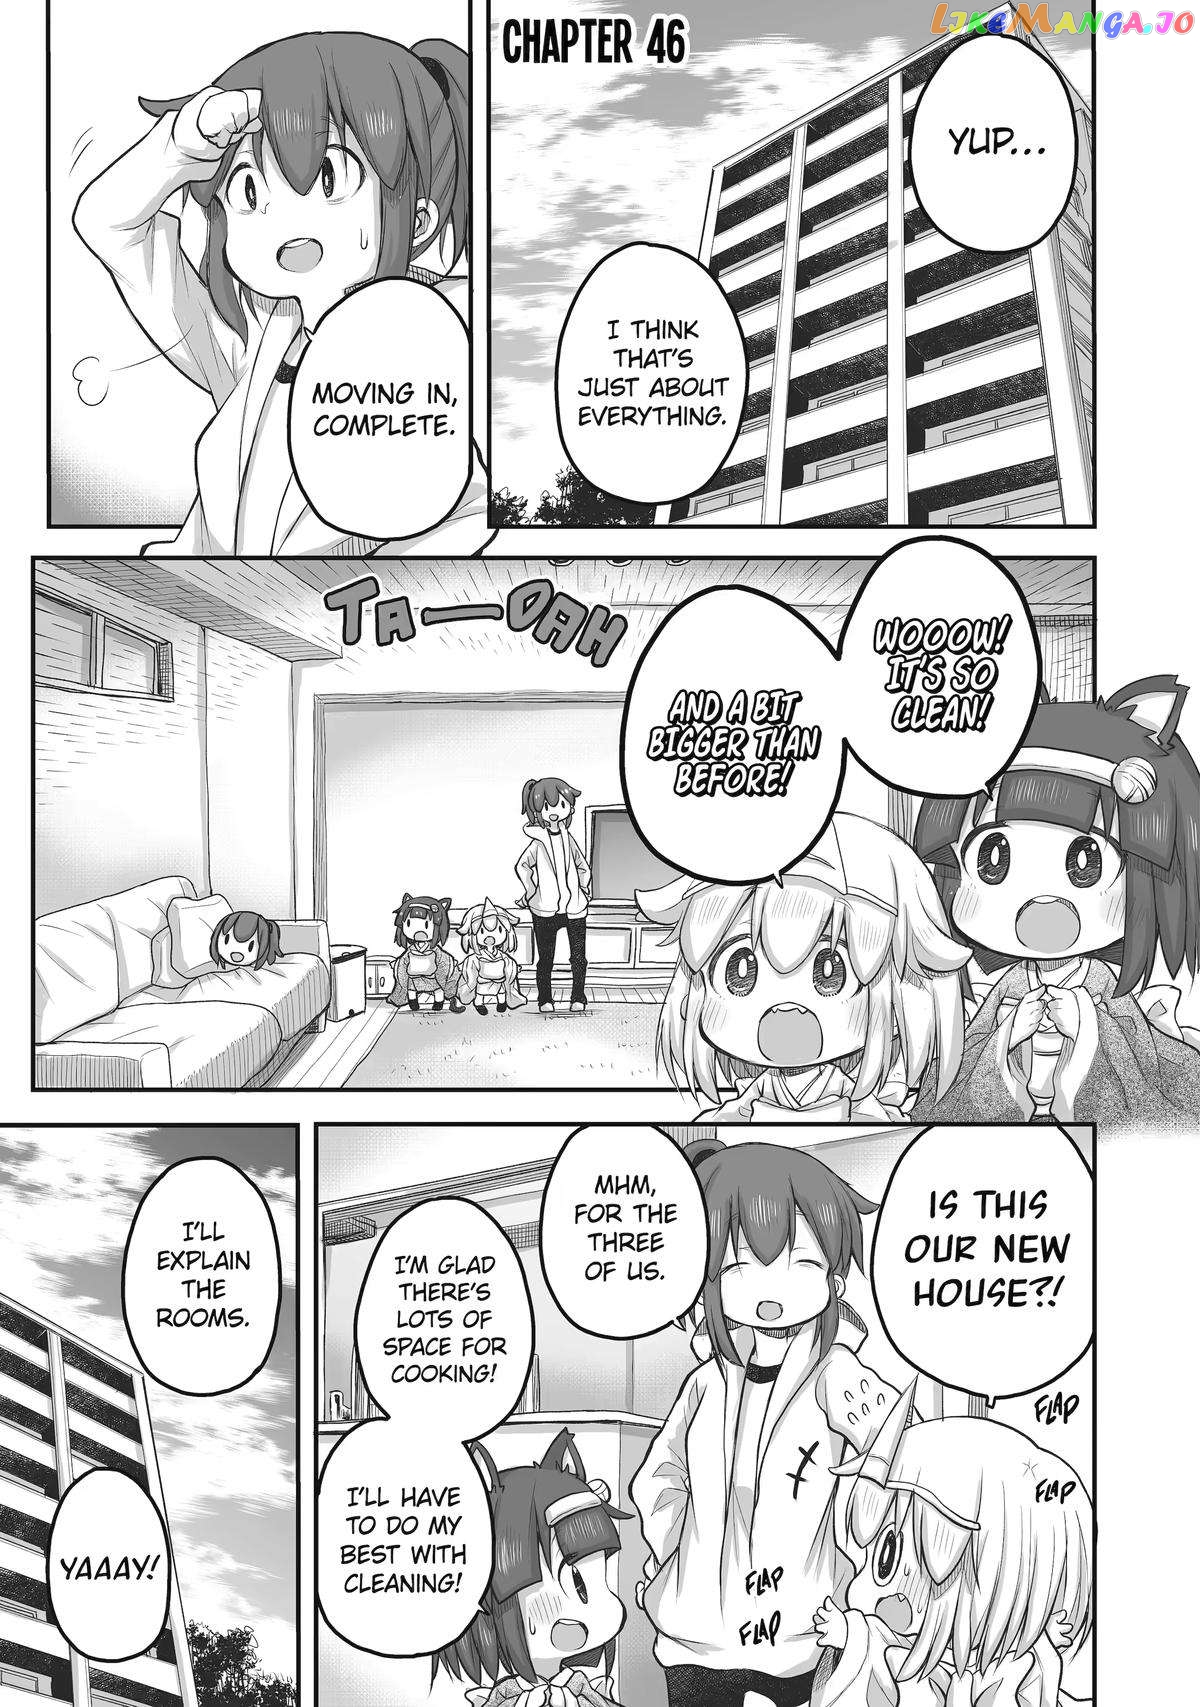 Ms. Corporate Slave Wants to be Healed by a Loli Spirit - chapter 46 - #1